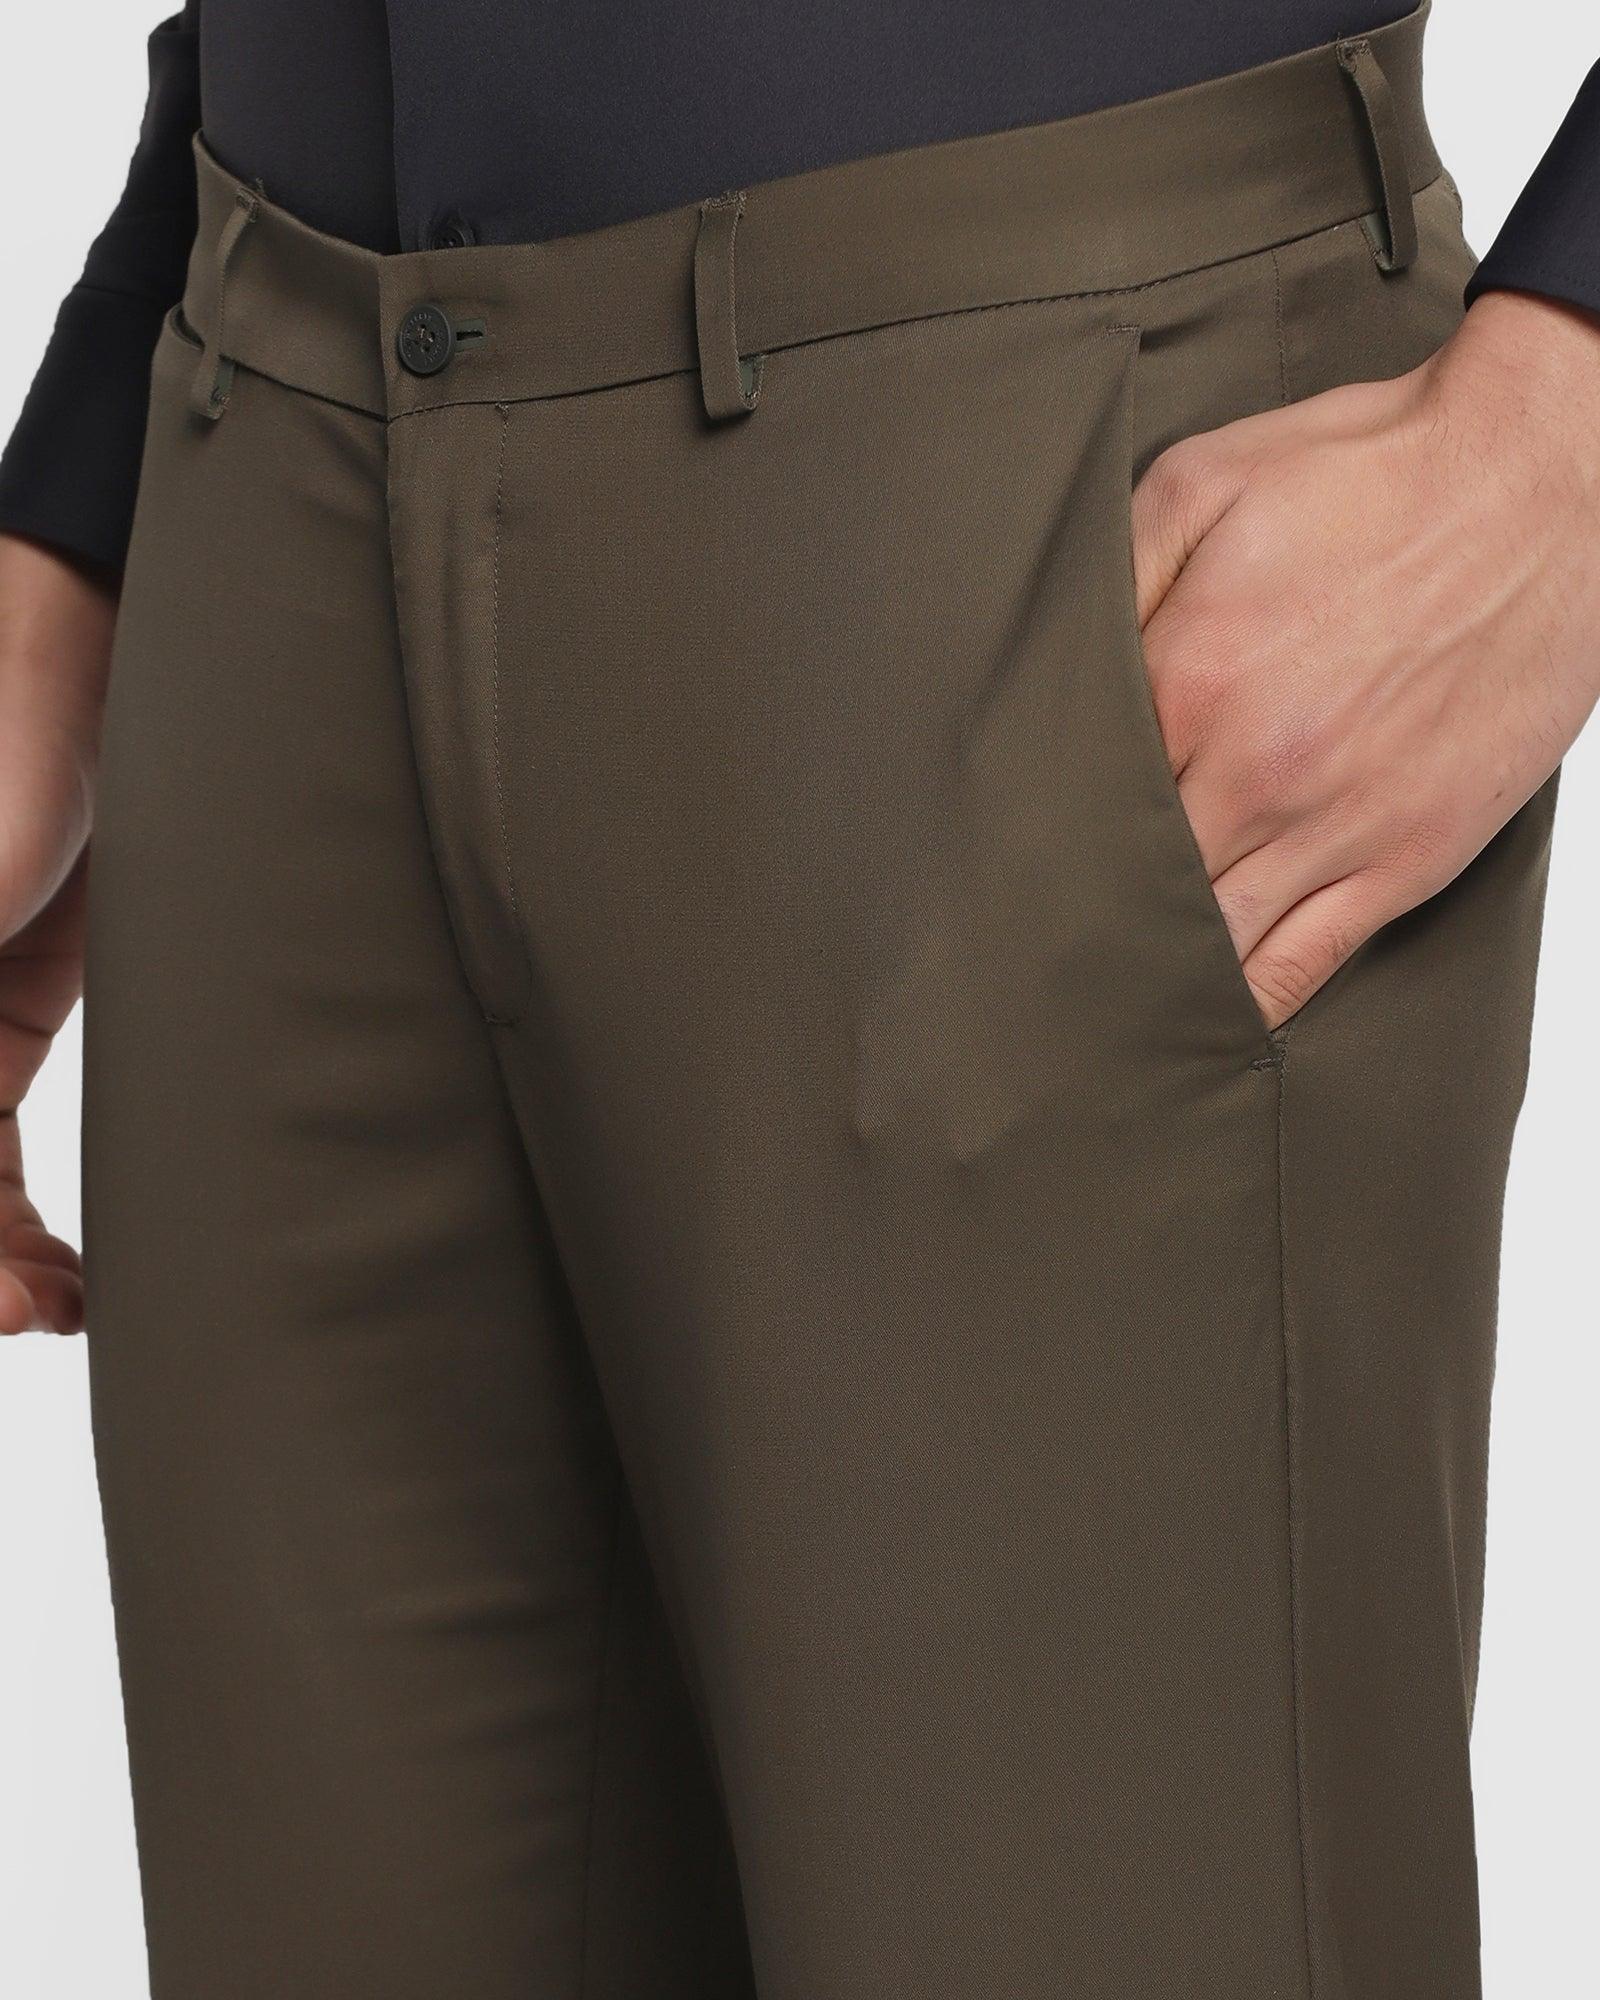 TechPro Slim Fit B-91 Casual Dark Olive Solid Khakis - Nord